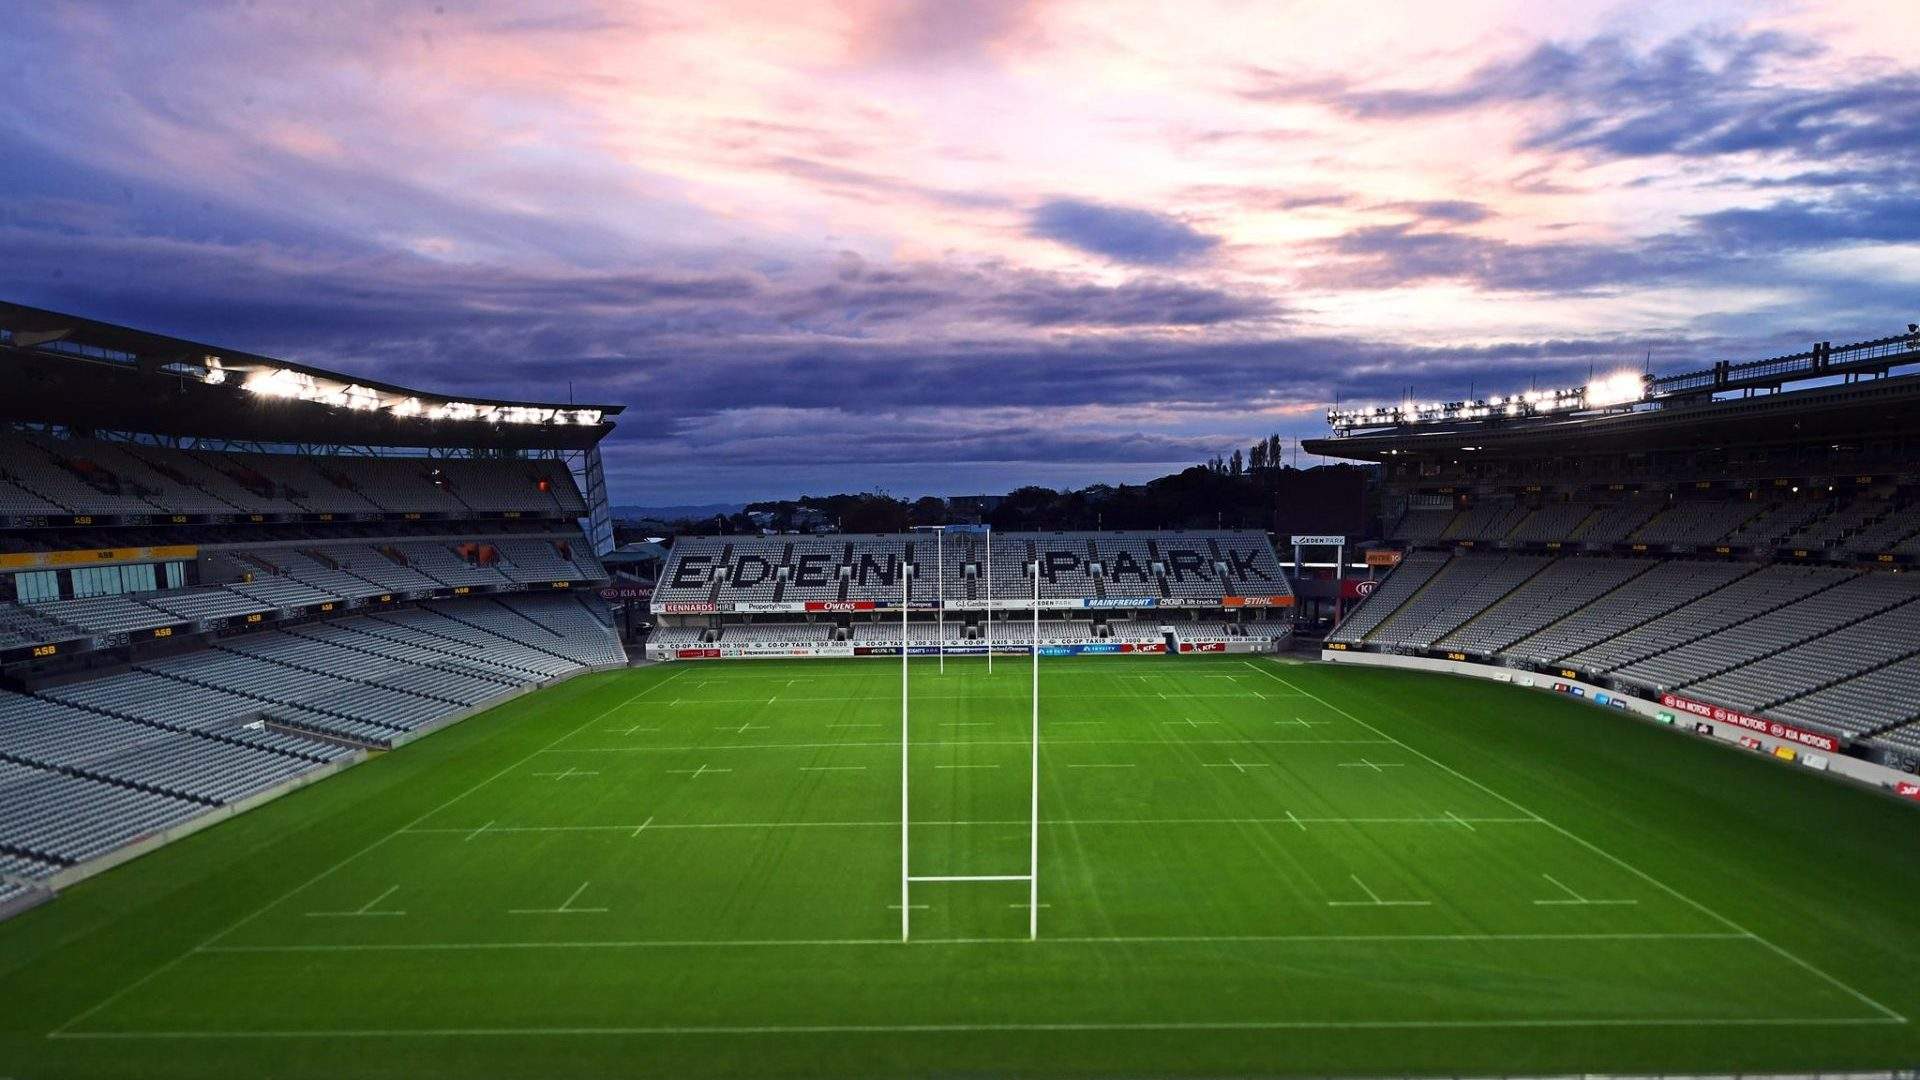 Six60 Will Become the First Band to Headline Auckland's Eden Park Stadium